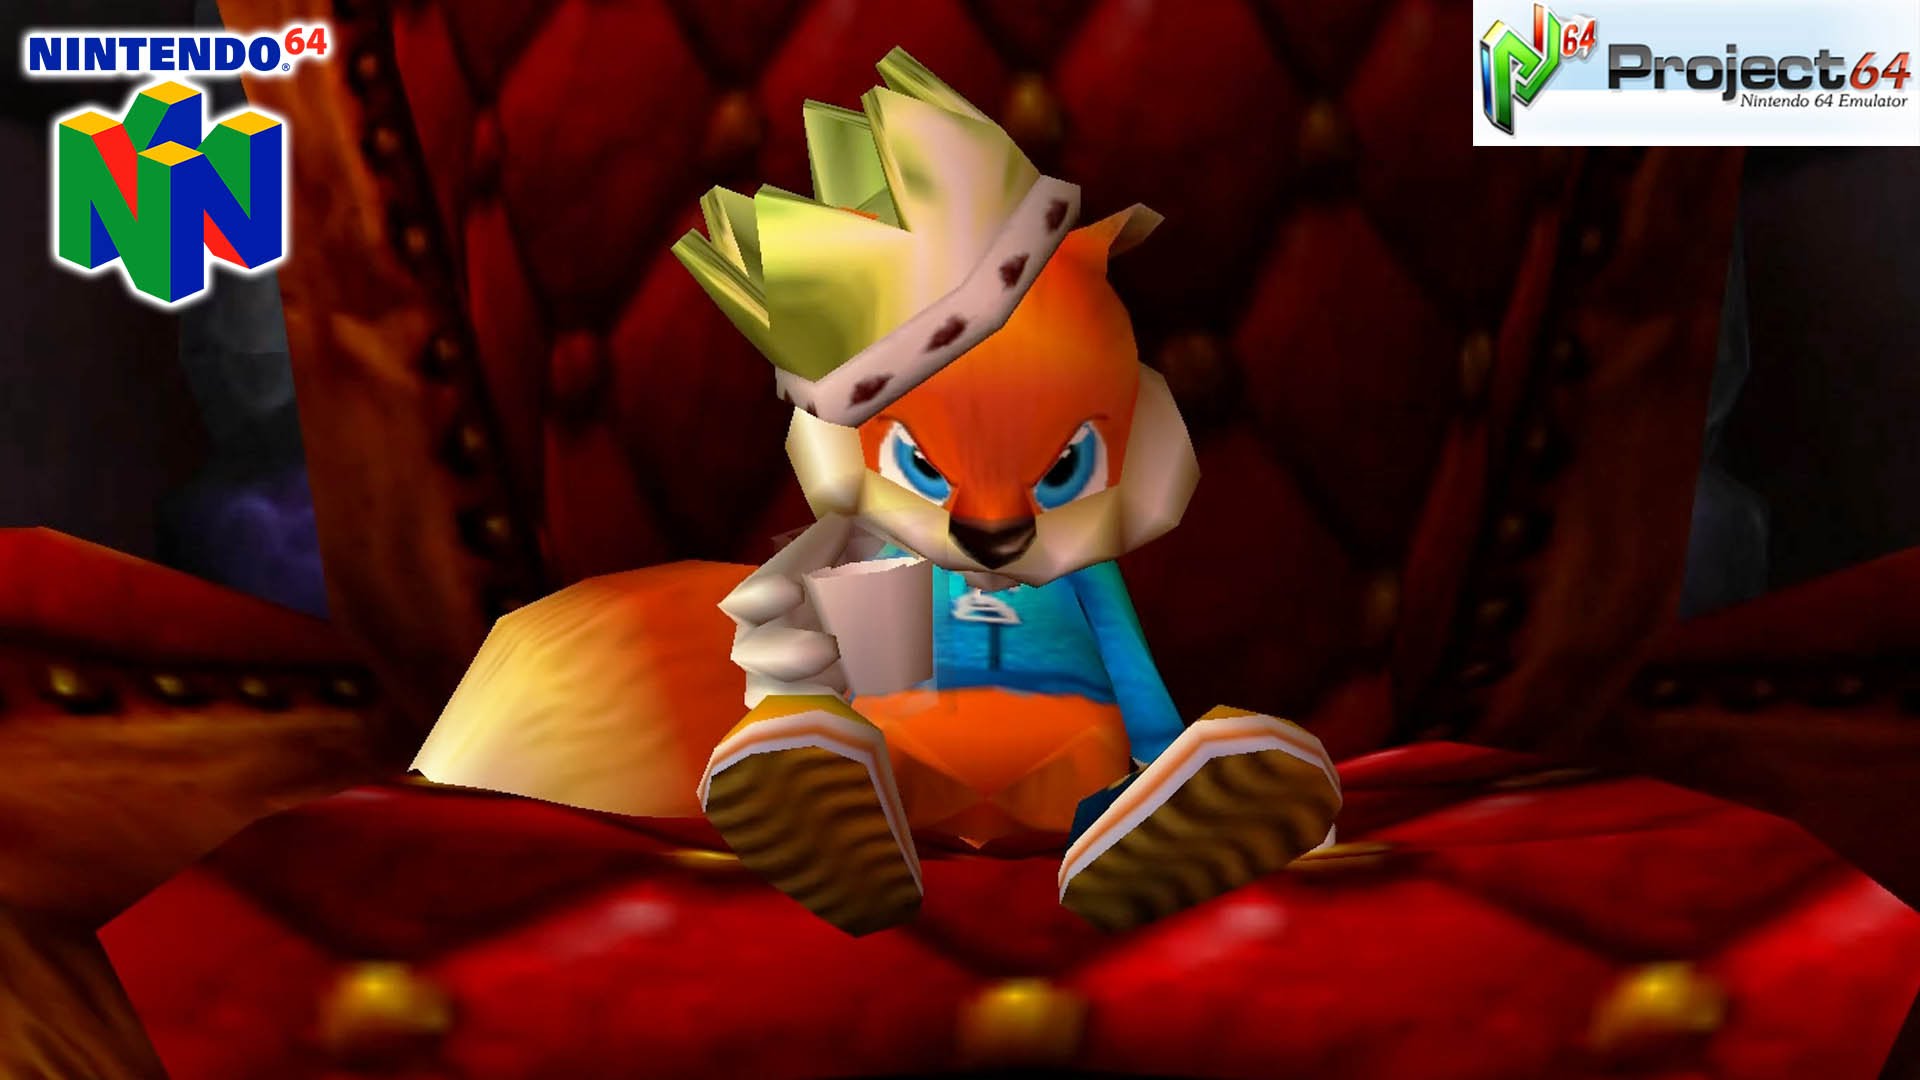 Conker's Bad Fur Day #26